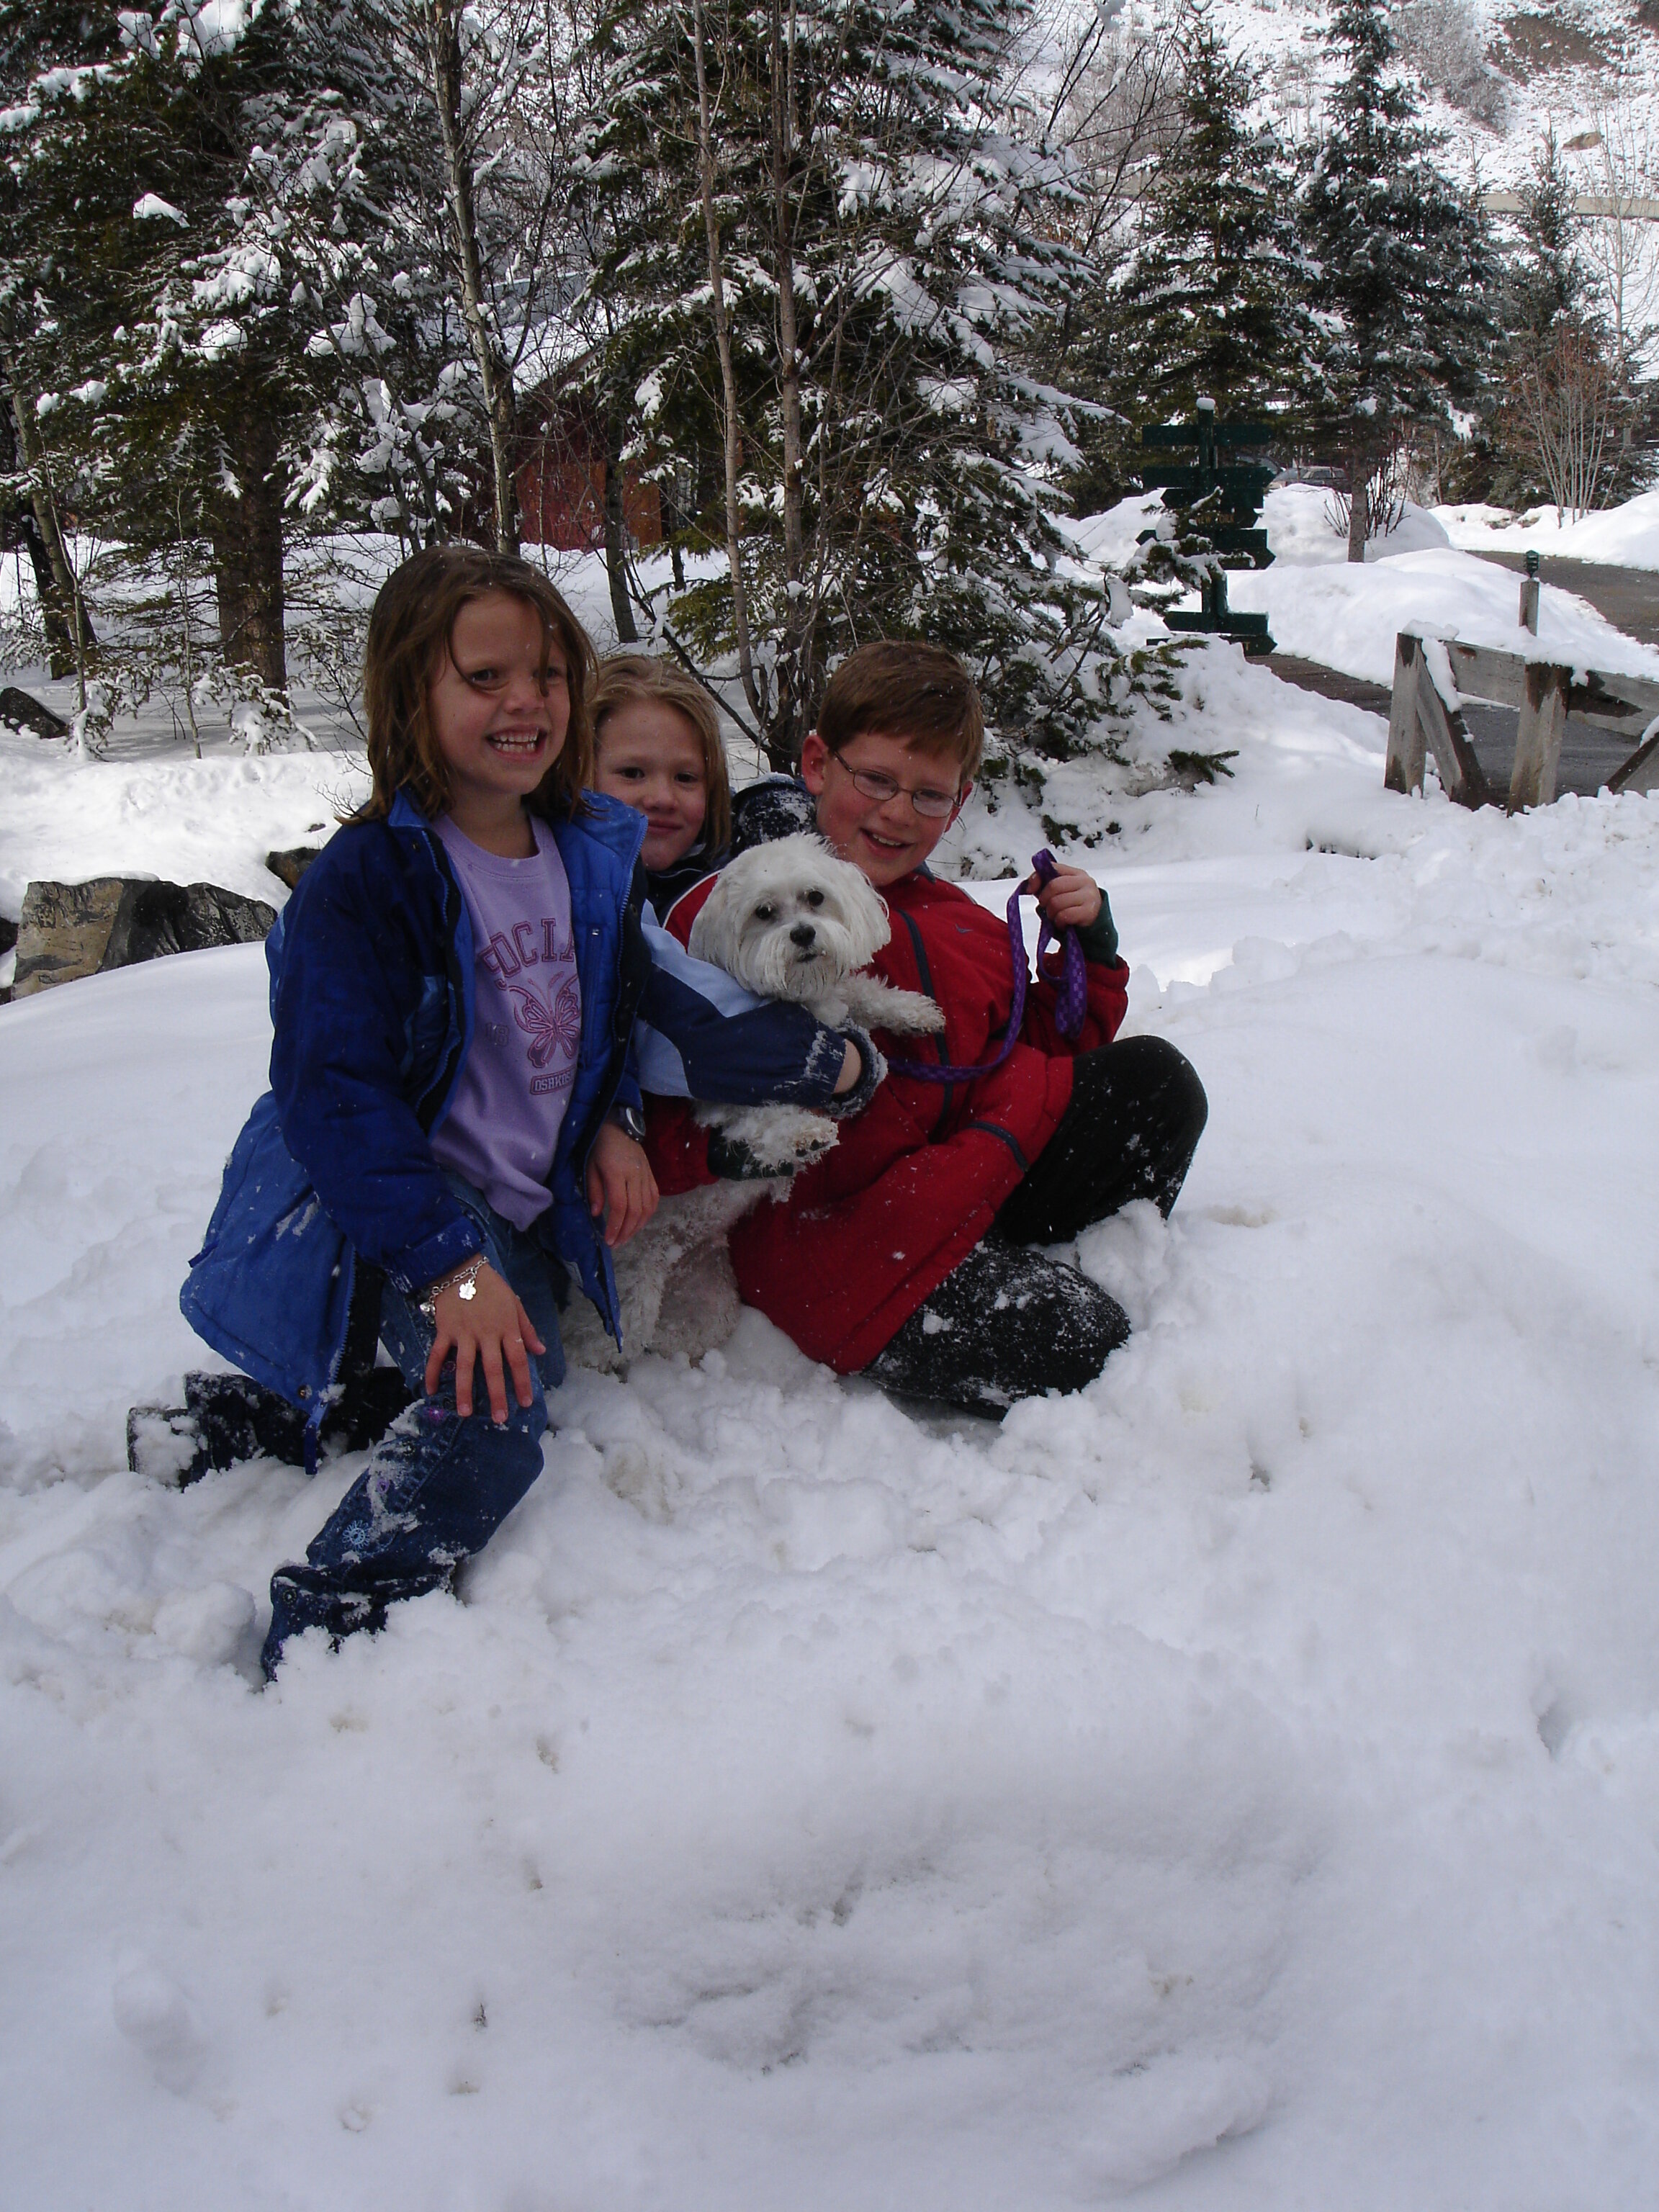 Kids in the snow. 2006. Timberlakes, UT.